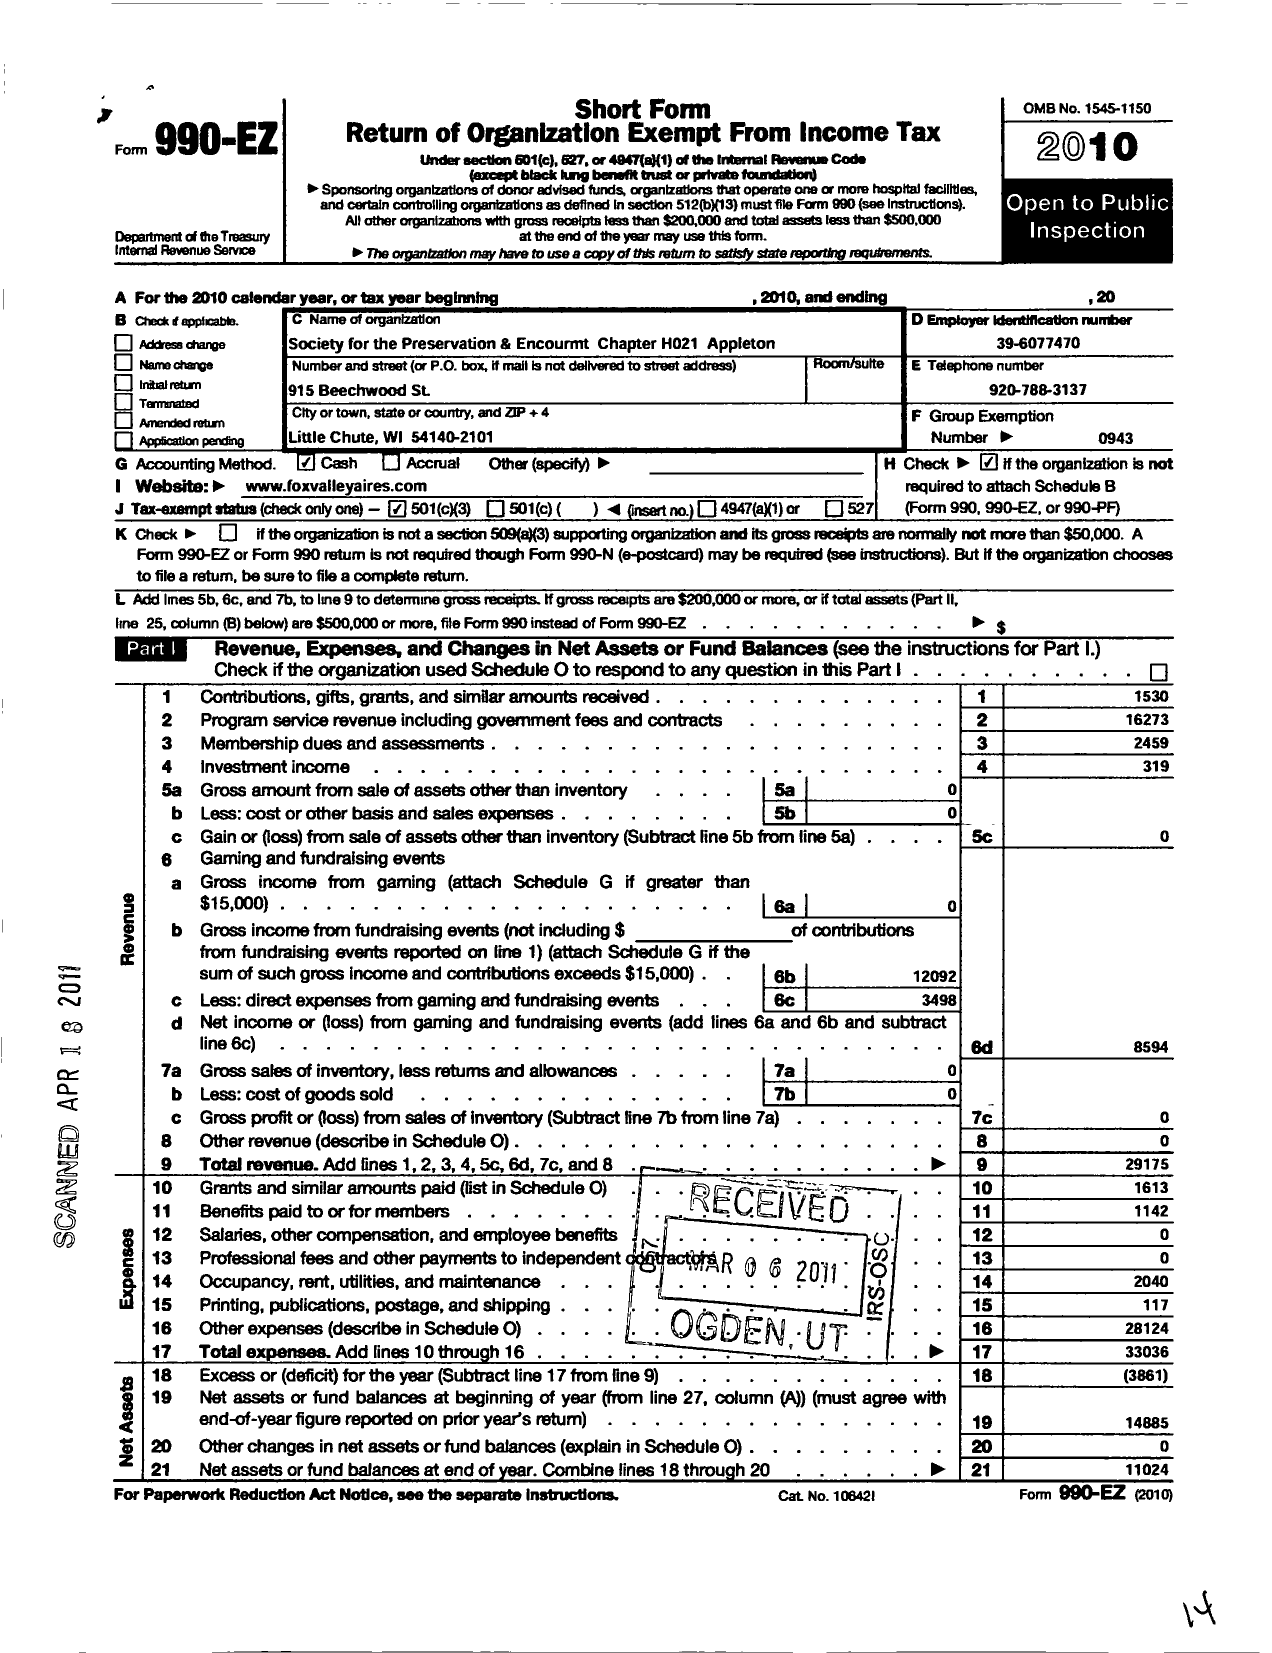 Image of first page of 2010 Form 990EZ for Barbershop Harmony Society - H021 Appleton